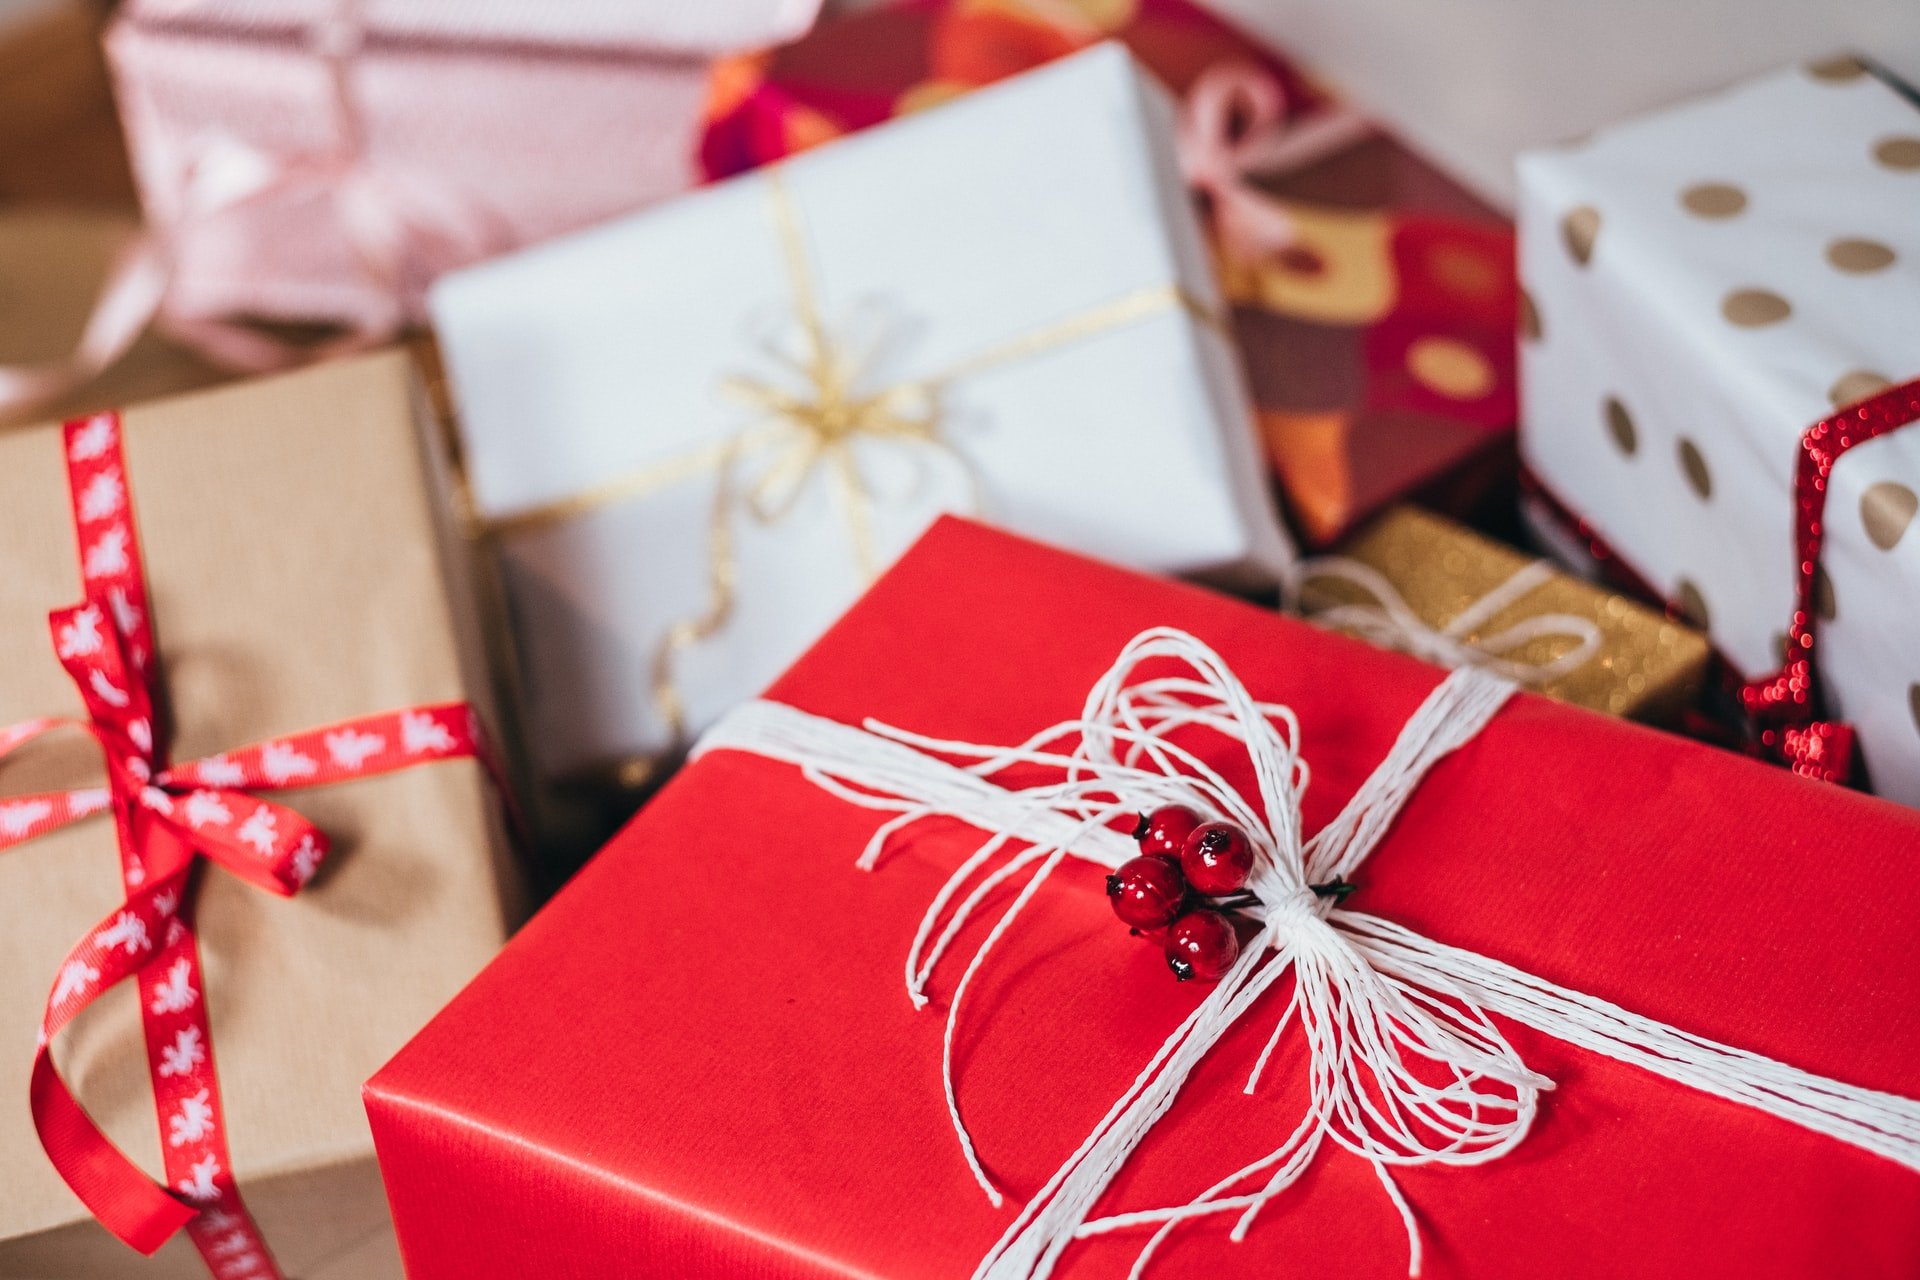 She helped her grandmother pack Christmas gifts | Source: Unsplash